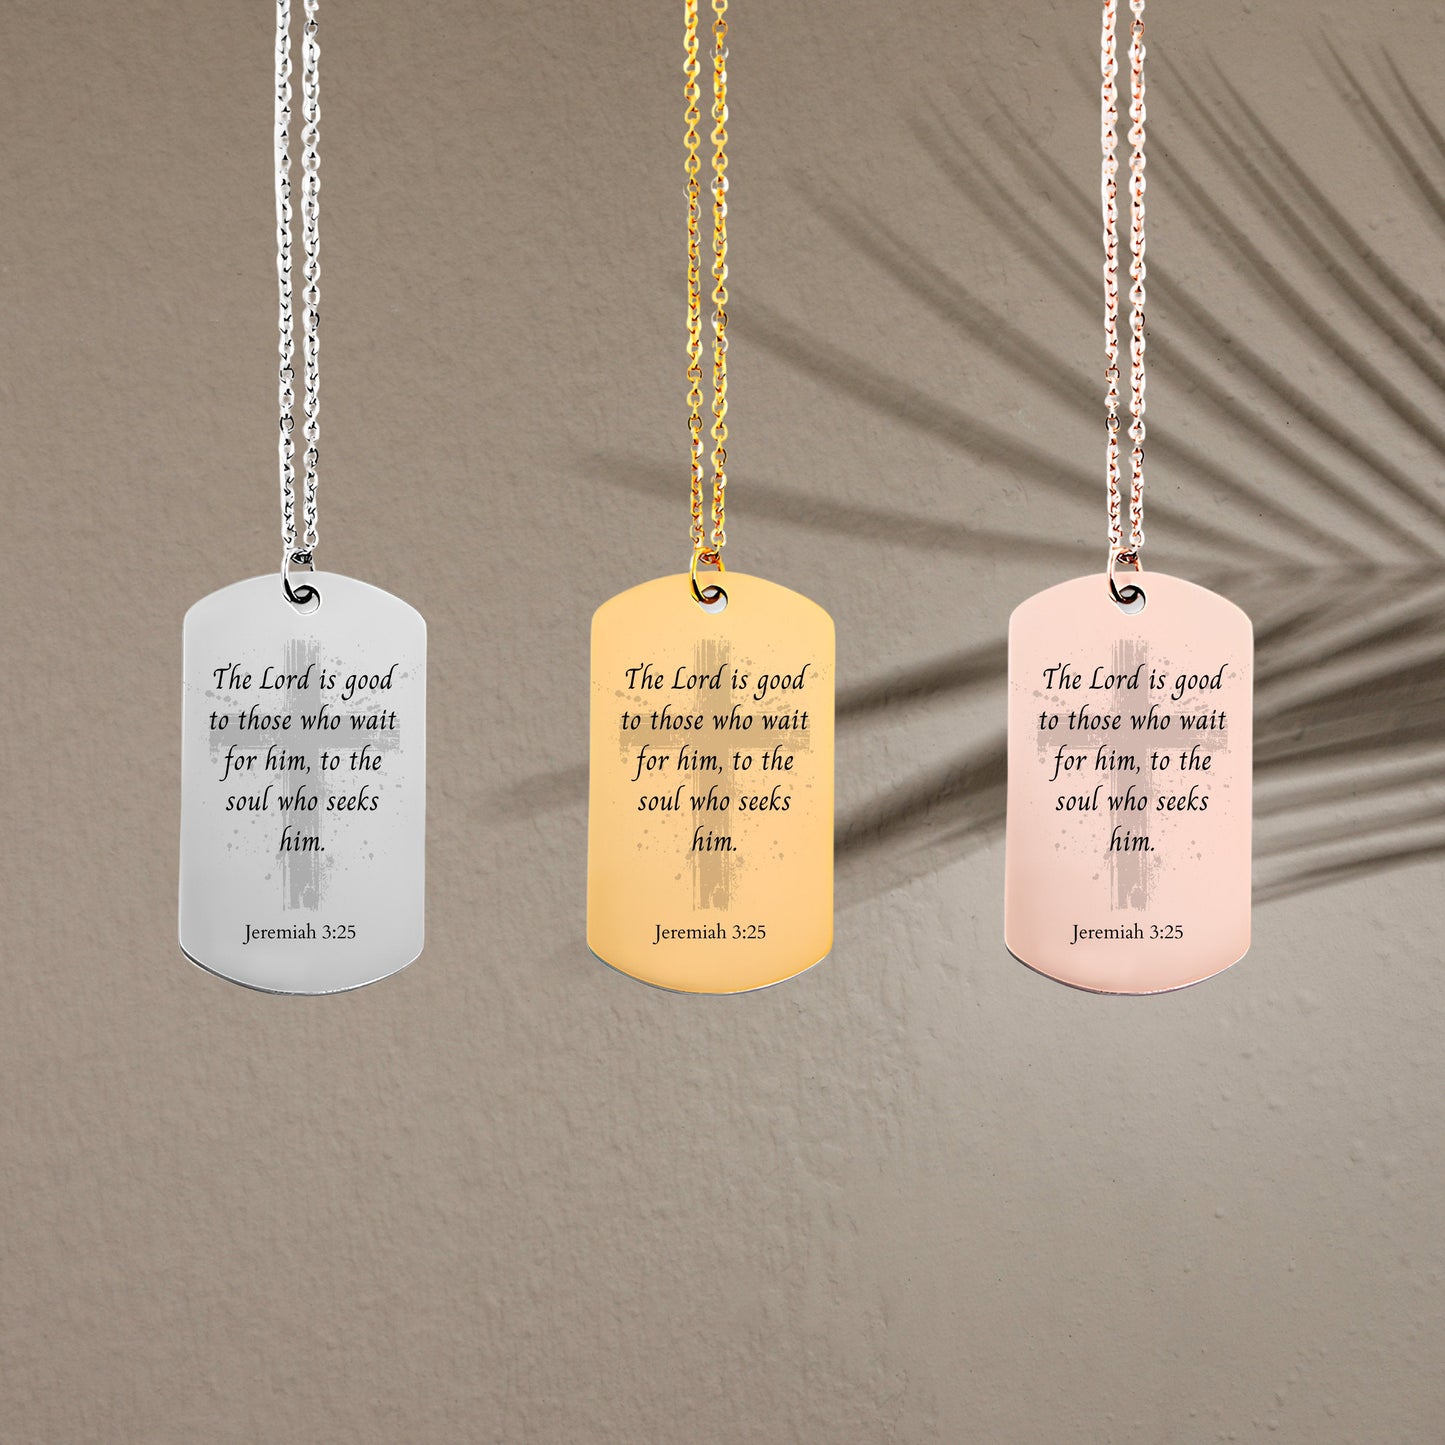 Jeremiah 3 25 quote necklace, gold bible verse, 14k gold cross charm necklace, confirmation gift, gold bar tag necklace, religious scripture